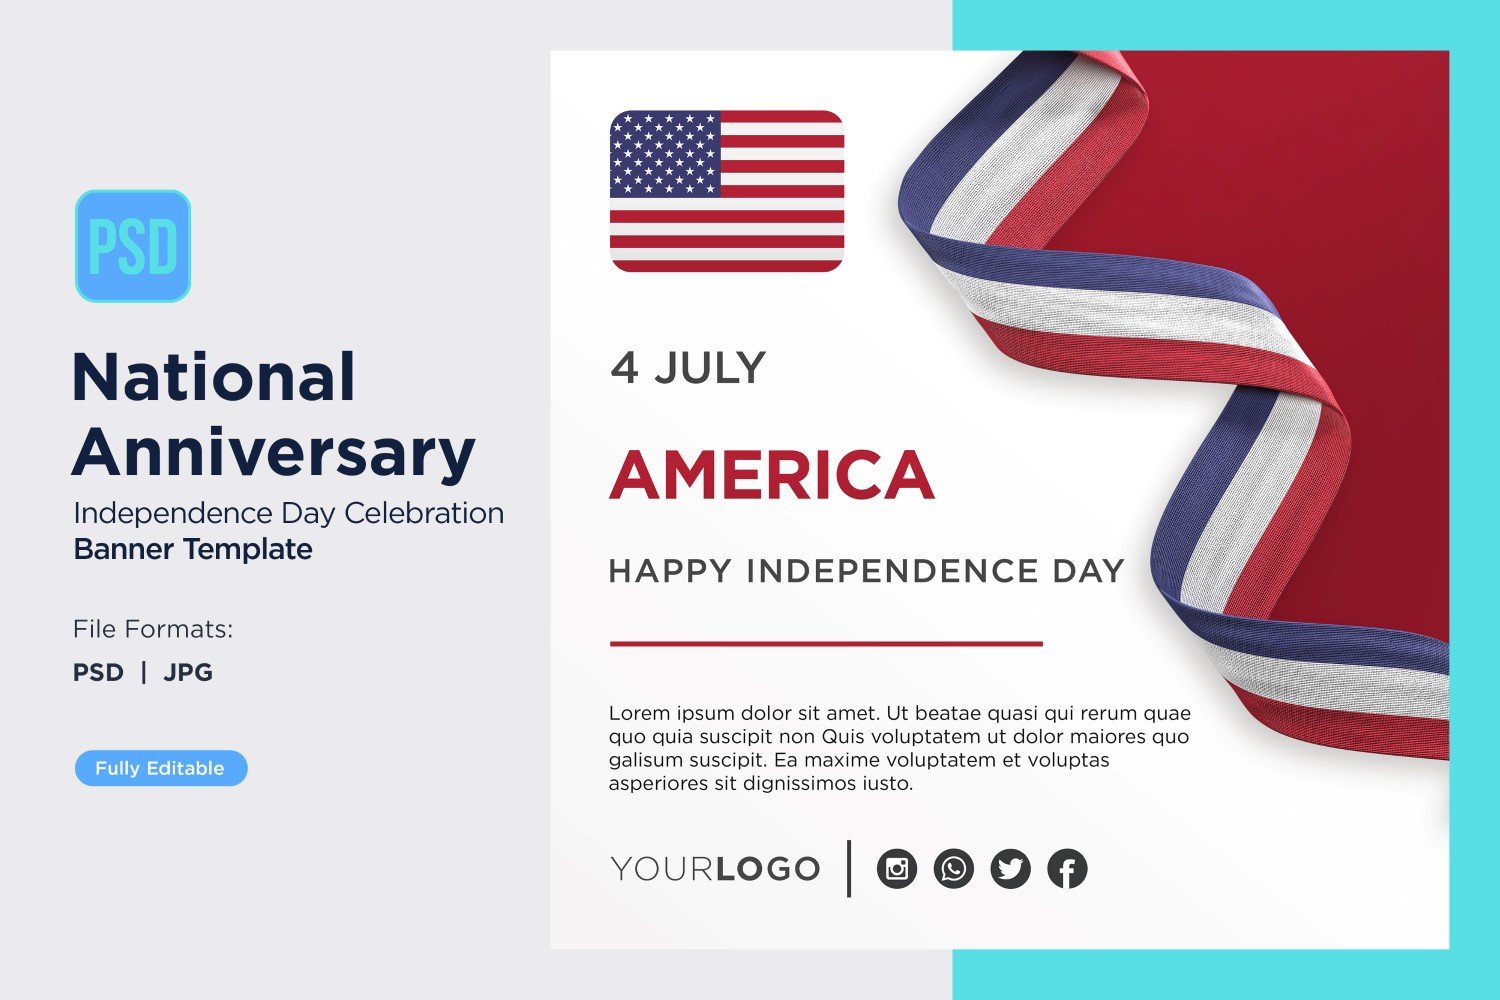 Template #402982 Day Celebration Webdesign Template - Logo template Preview